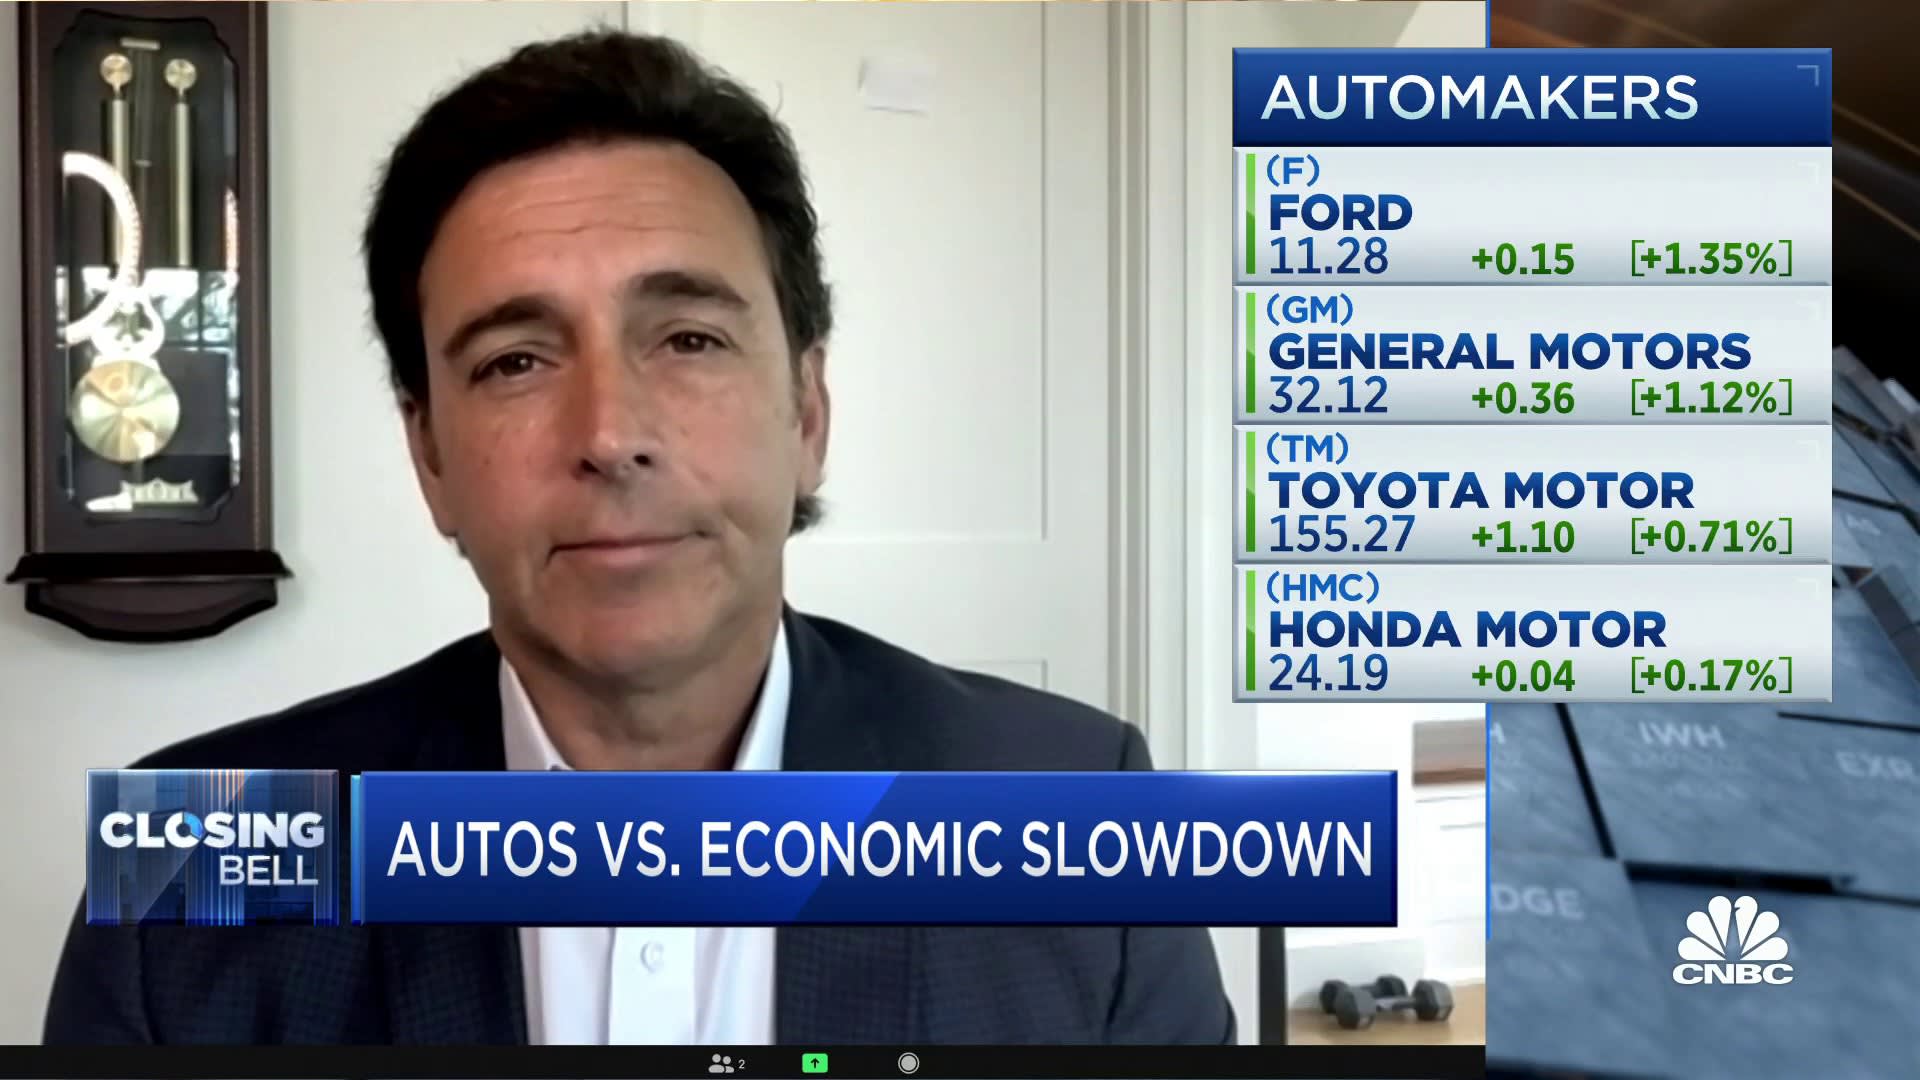 we-re-in-an-unprecedented-time-in-the-auto-industry-with-rising-demand-heading-into-a-recession-says-former-ford-ceo